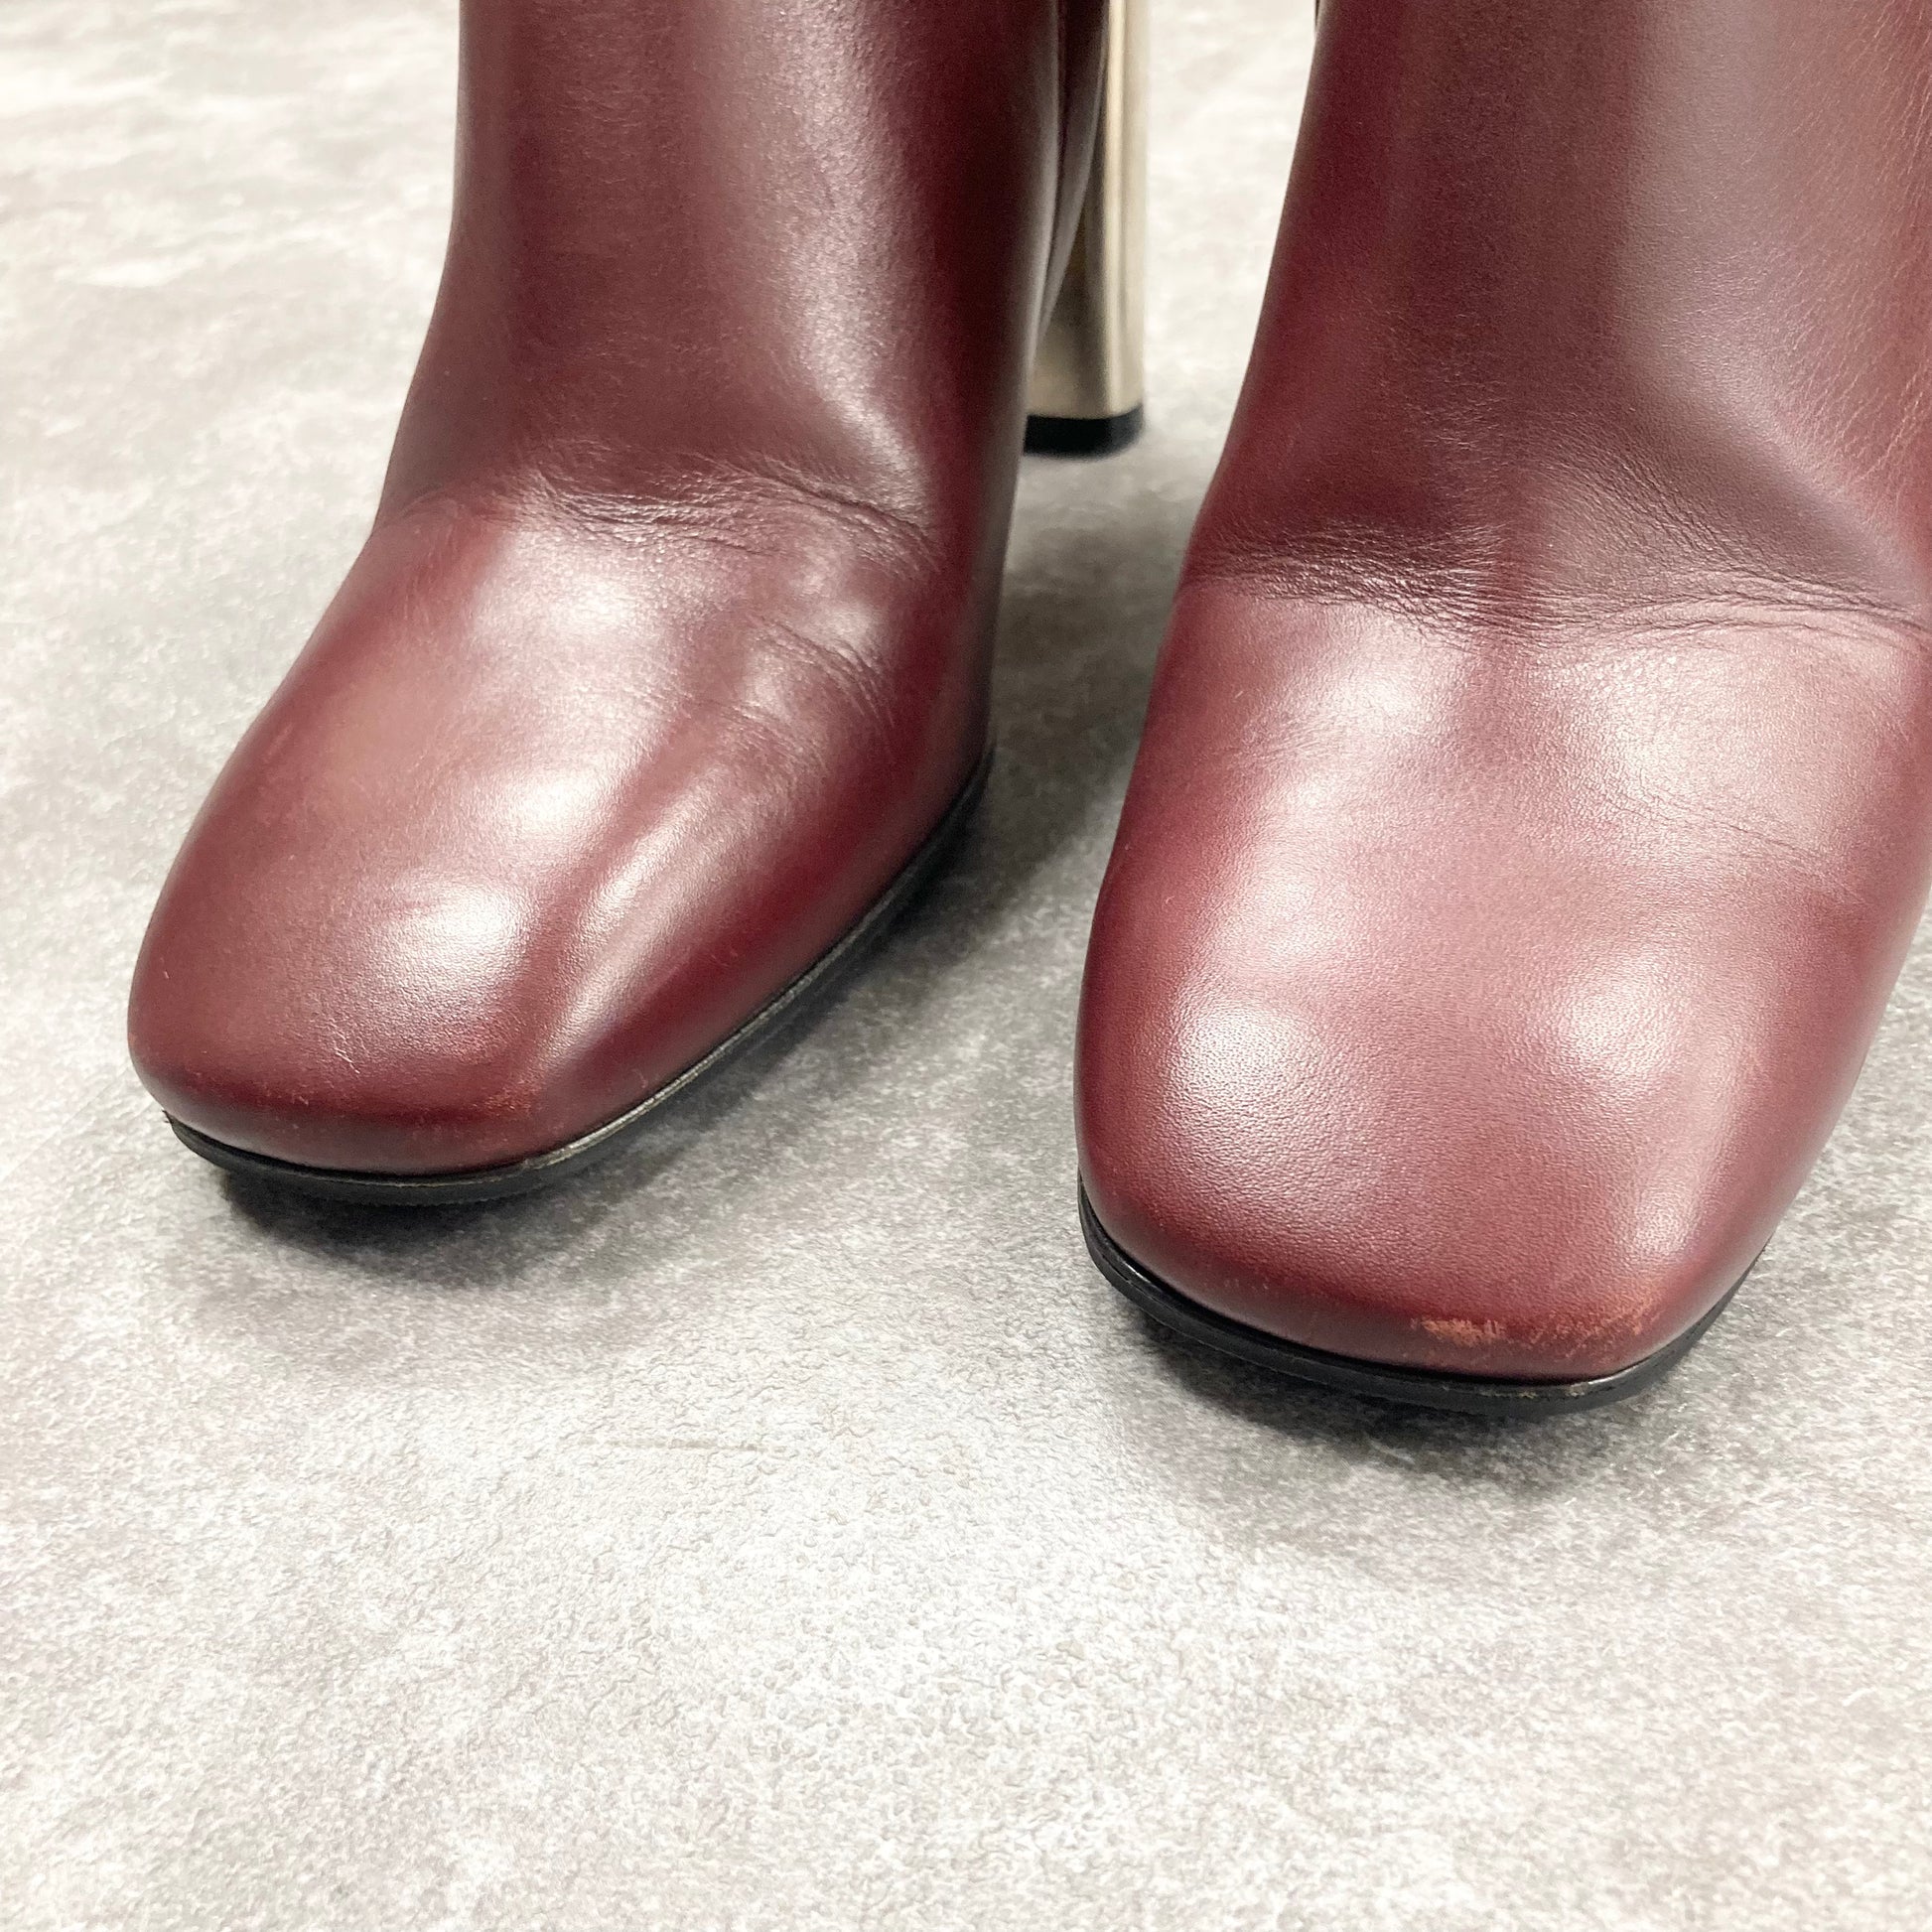 Celine by Phoebe Philo Boots セリーヌ バンバン ブーツ レザー